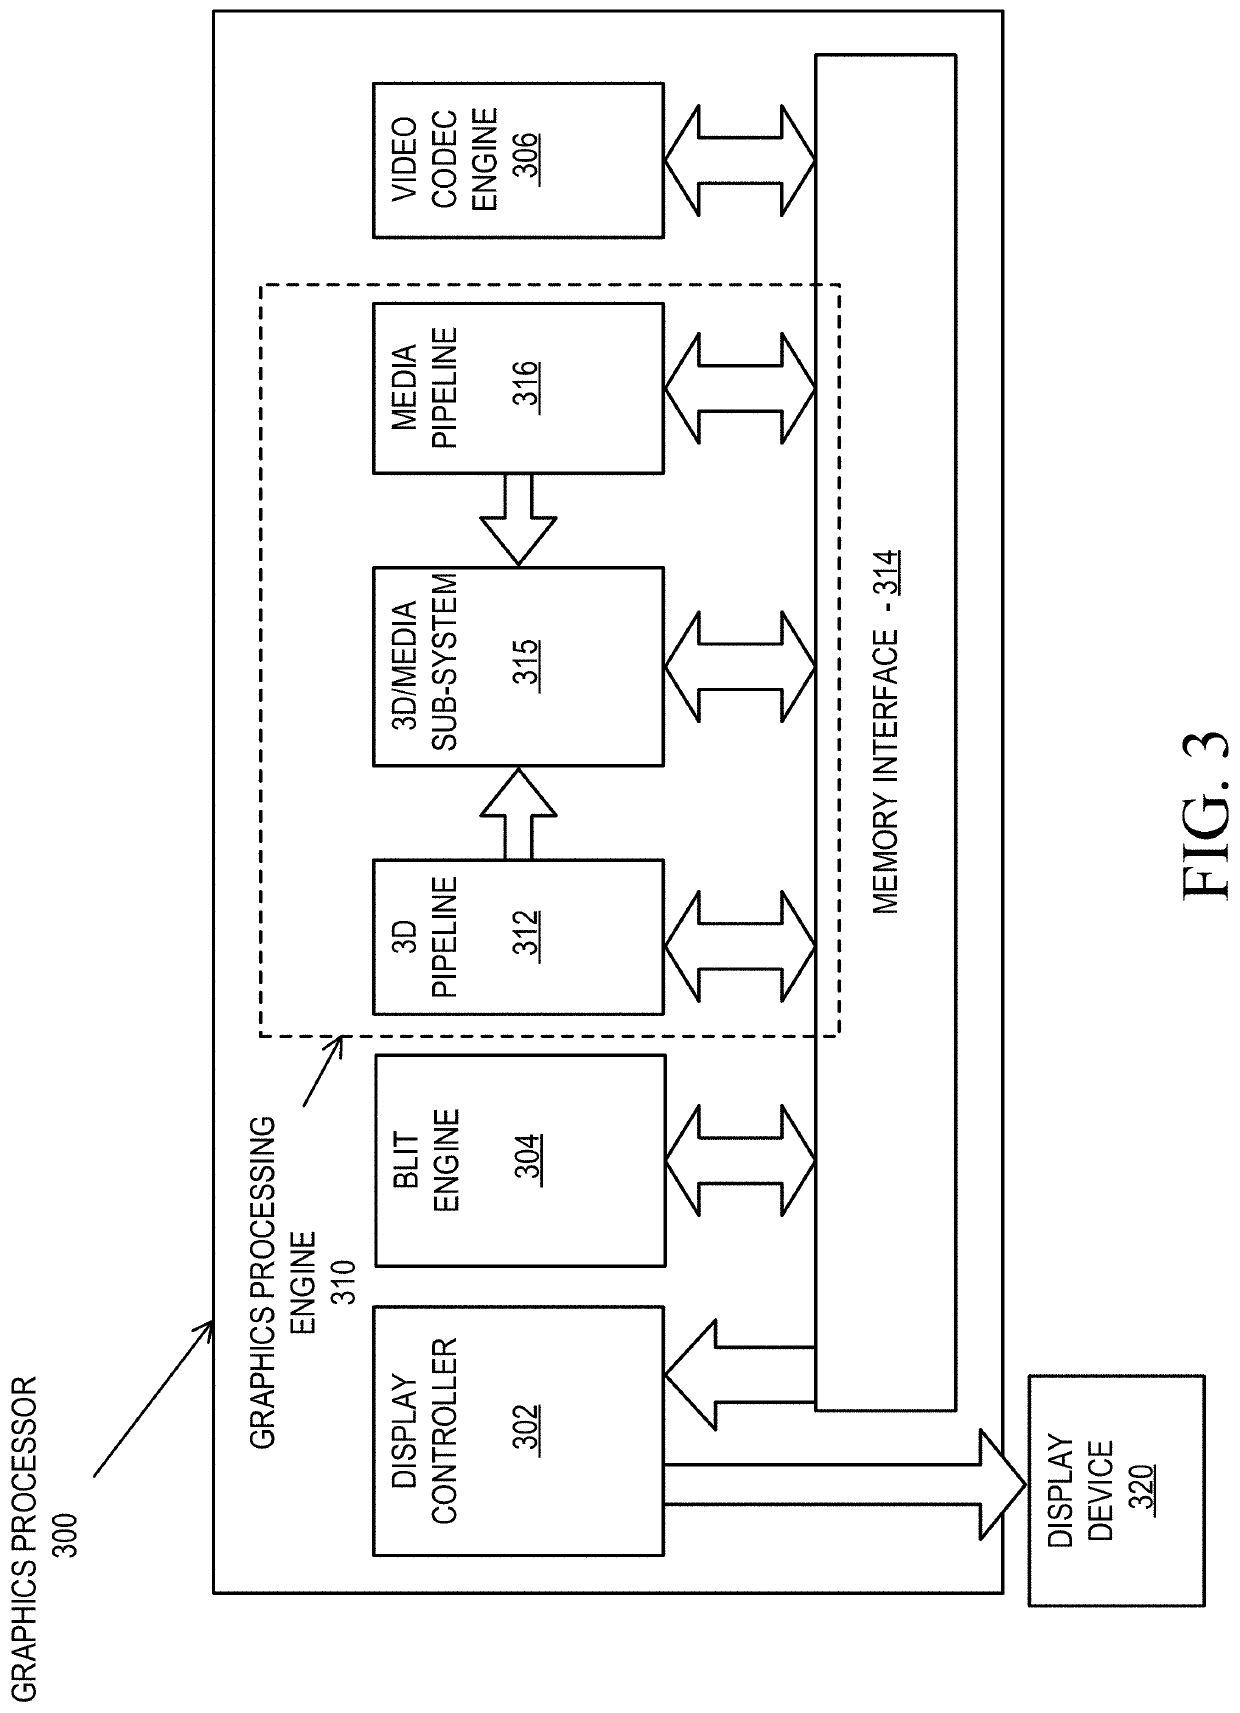 Apparatus and method for cross-instance front-to-back traversal for ray tracing heavily-instanced scenes